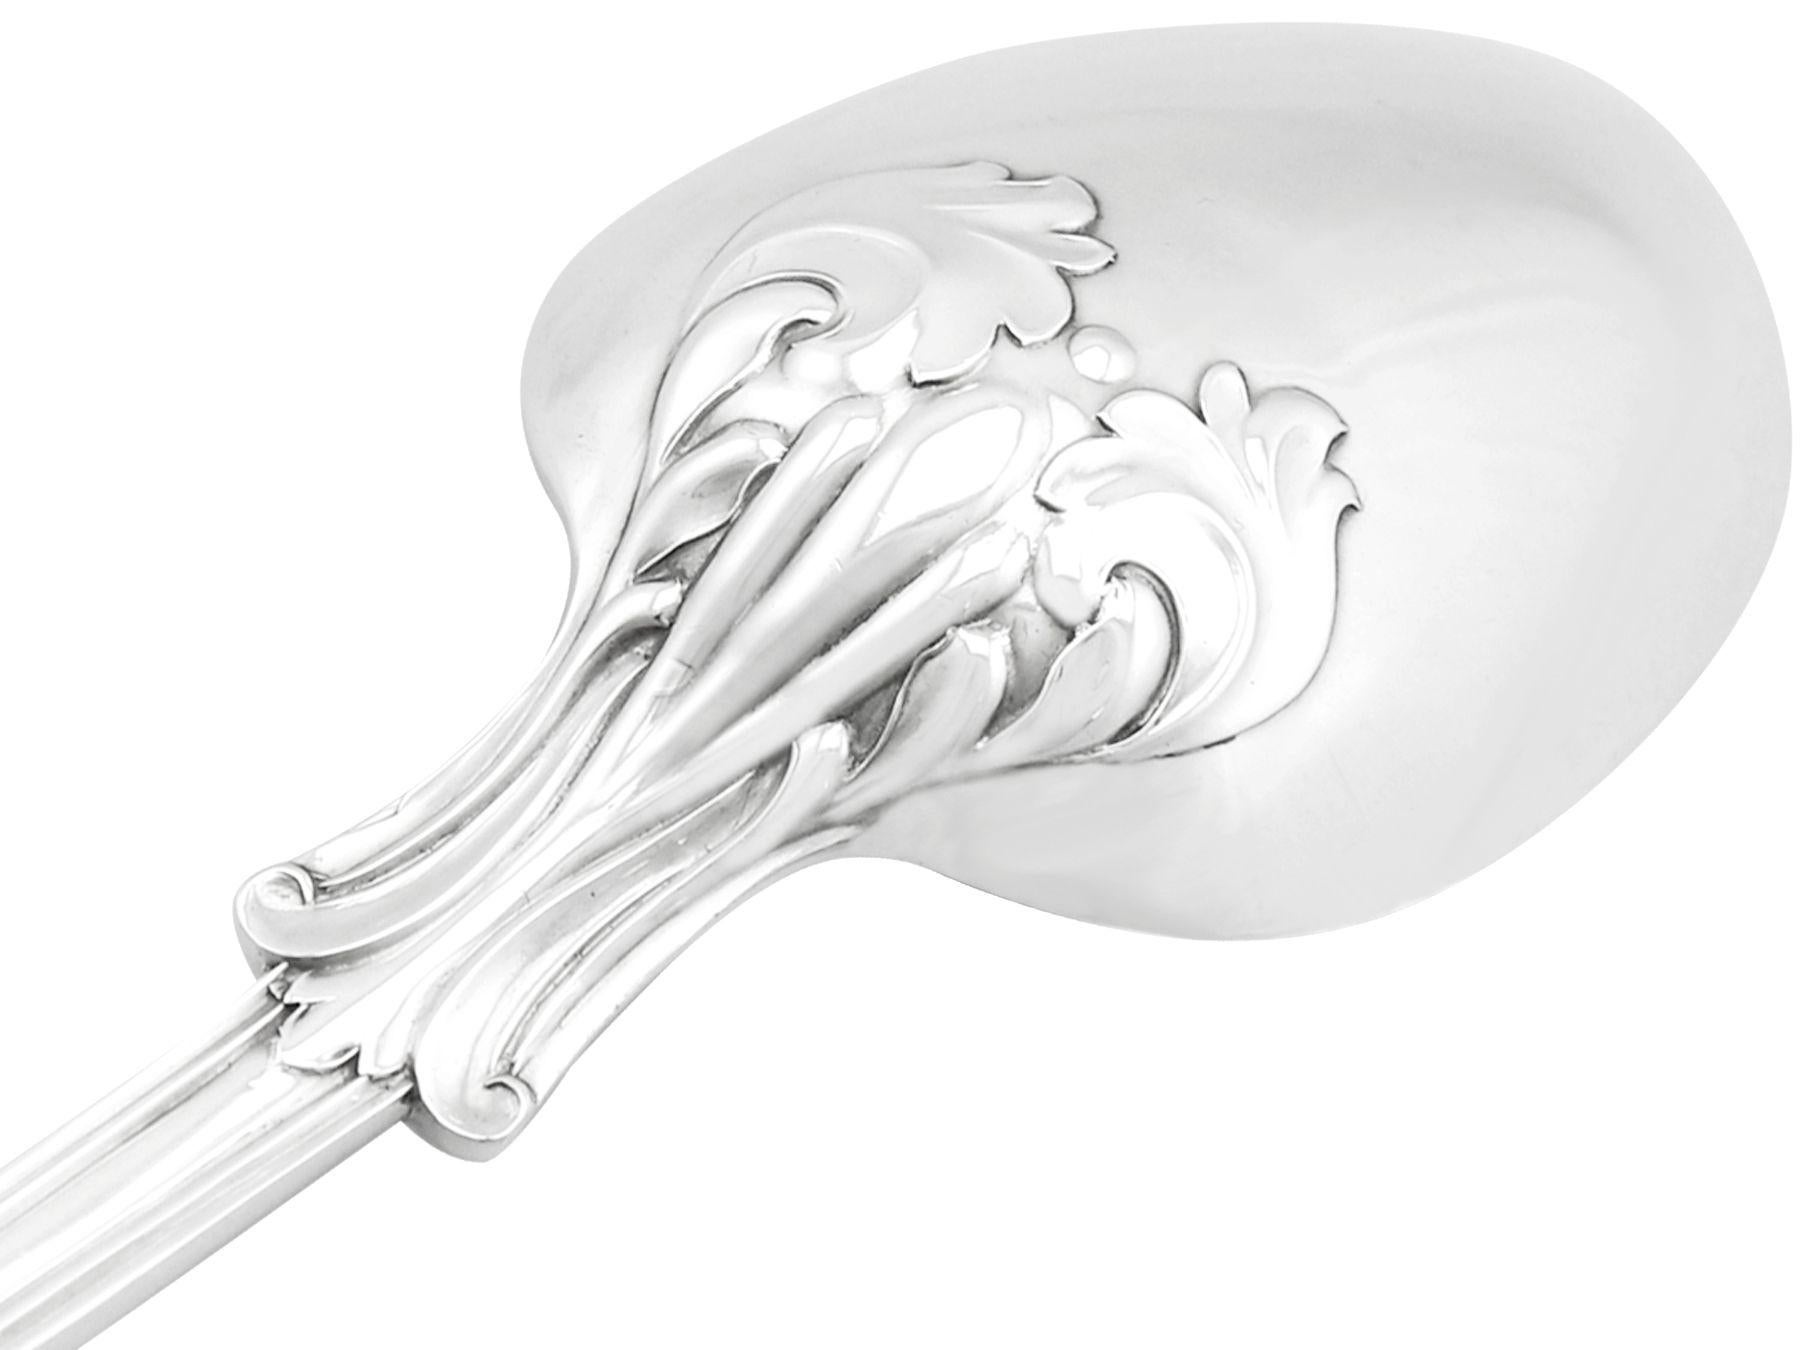 1862 Antique Victoria Pattern Sterling Silver Gravy Spoon In Excellent Condition For Sale In Jesmond, Newcastle Upon Tyne